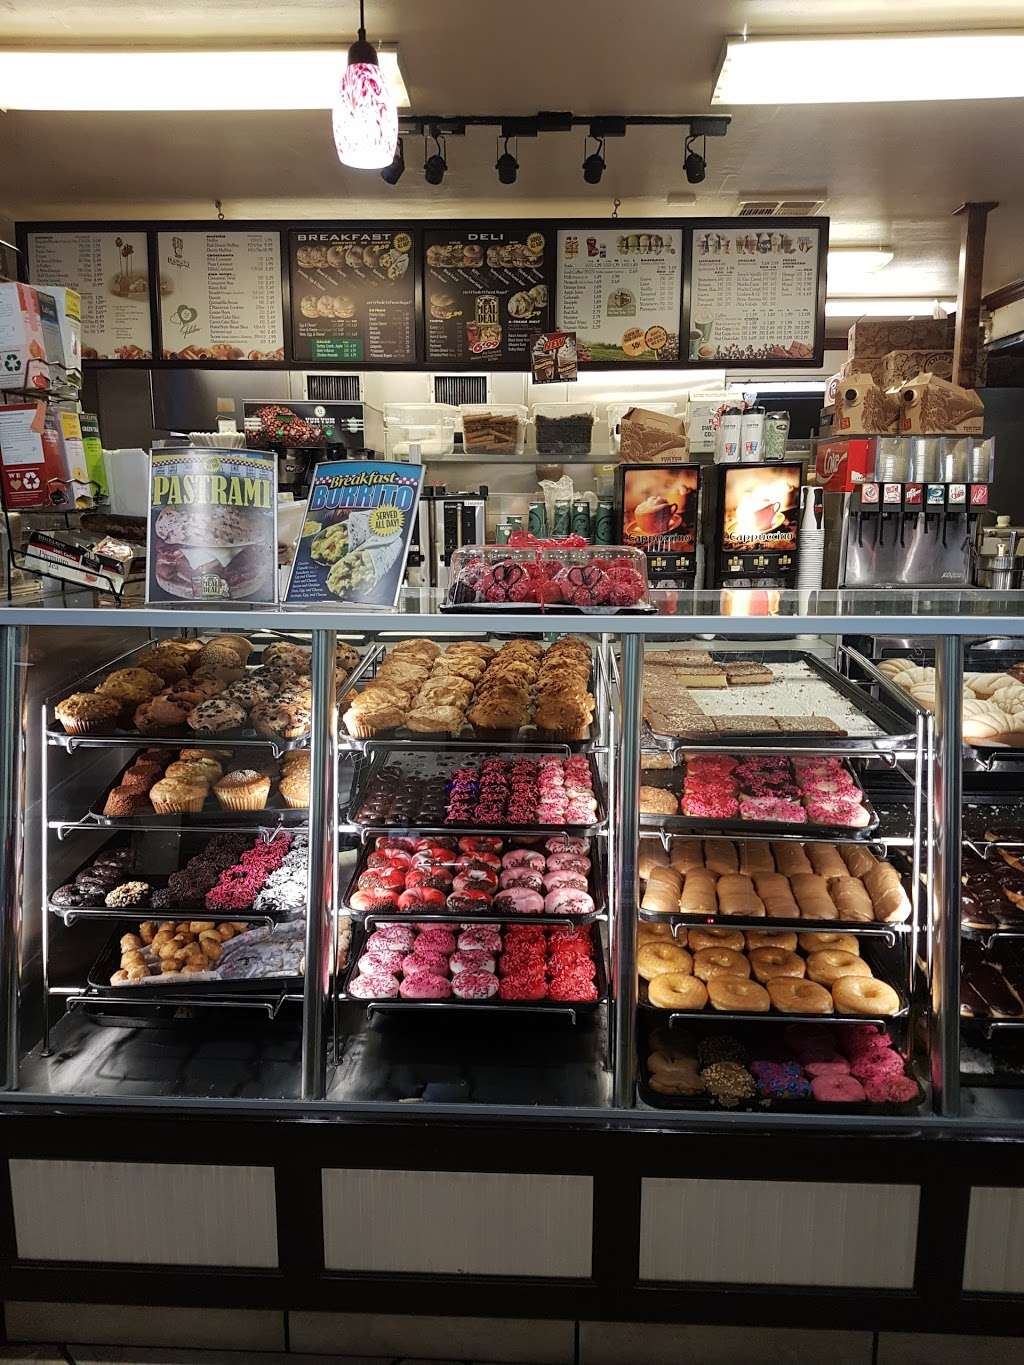 Yum Yum Donuts - cafe  | Photo 1 of 10 | Address: 1431 E 4th St, Ontario, CA 91764, USA | Phone: (909) 391-9554